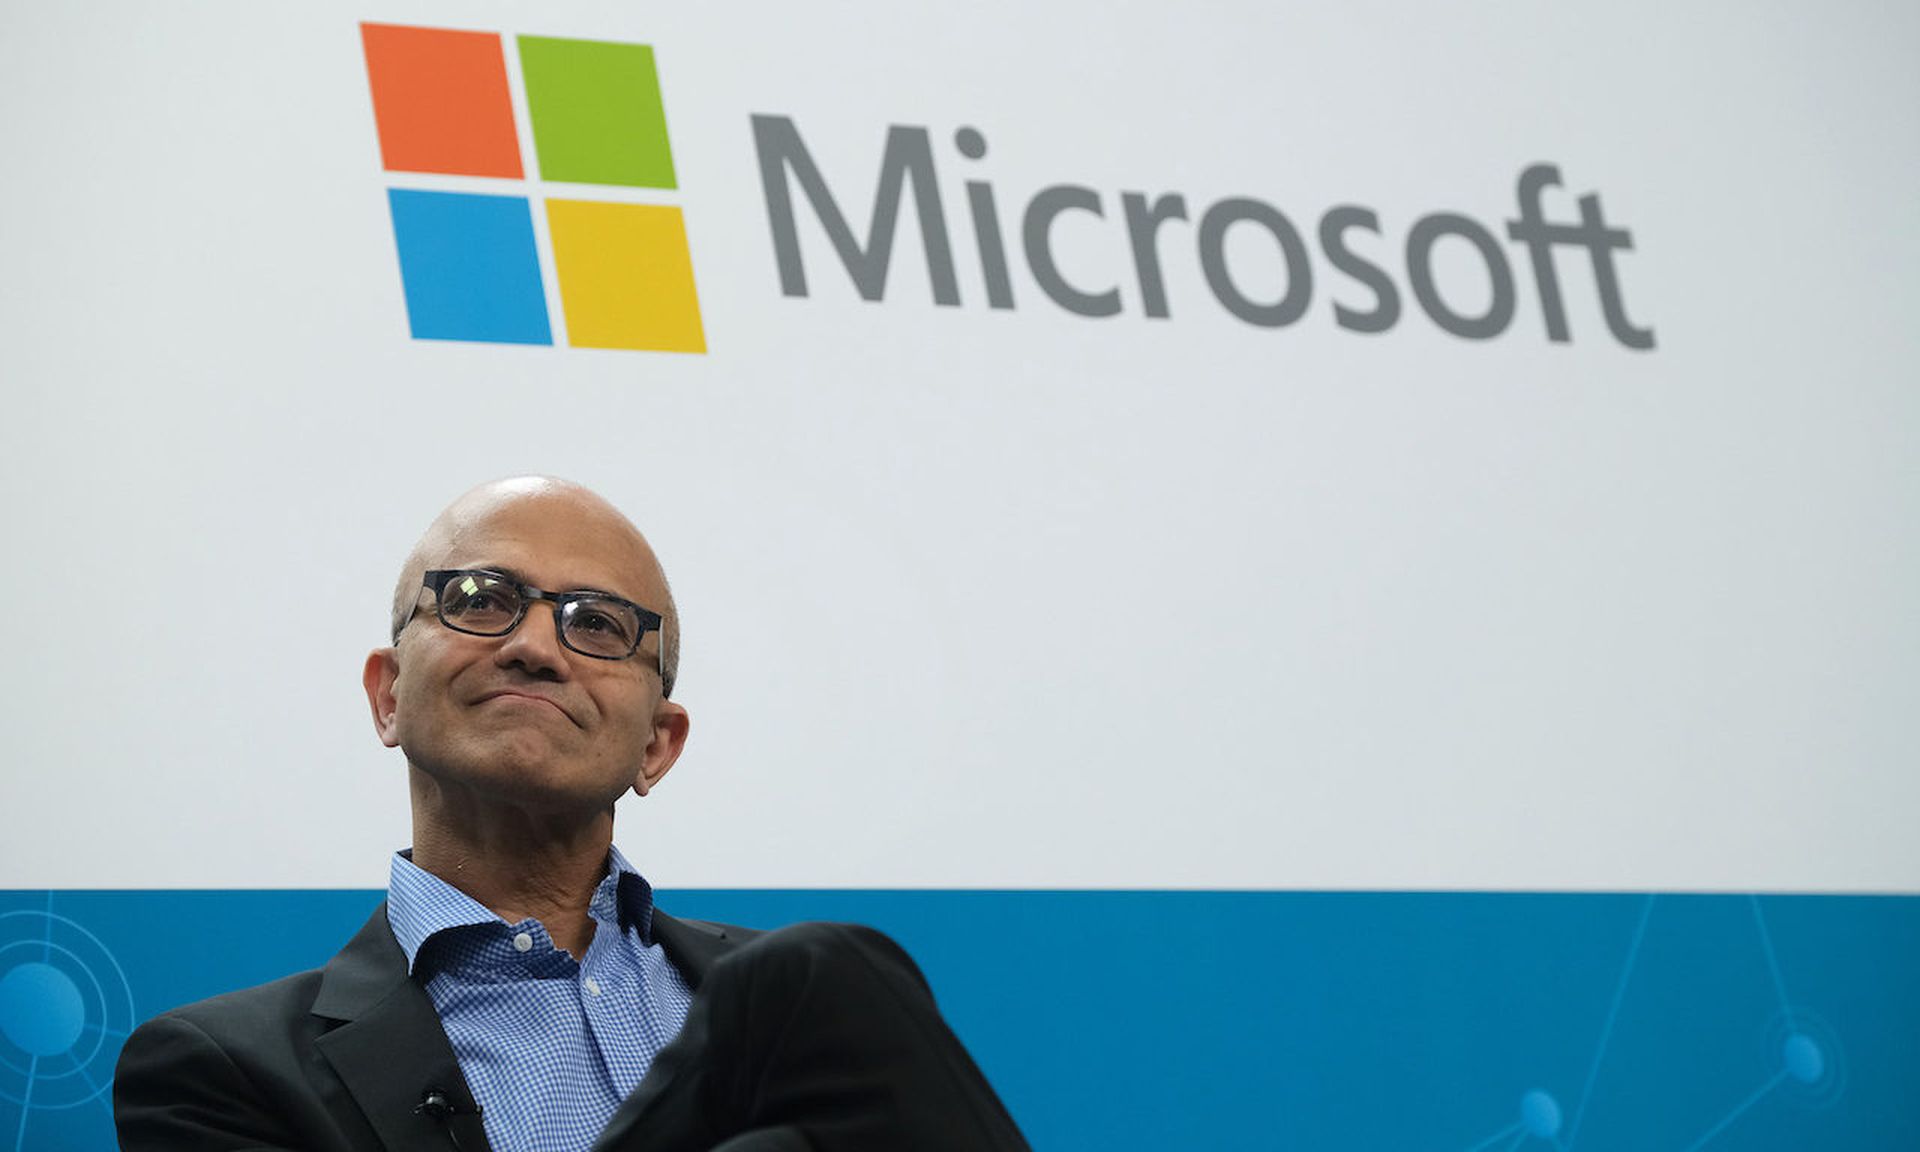 Satya Nadella, CEO of Microsoft, speaks to the media in February 27, 2019 in Berlin, Germany. (Photo by Sean Gallup/Getty Images)